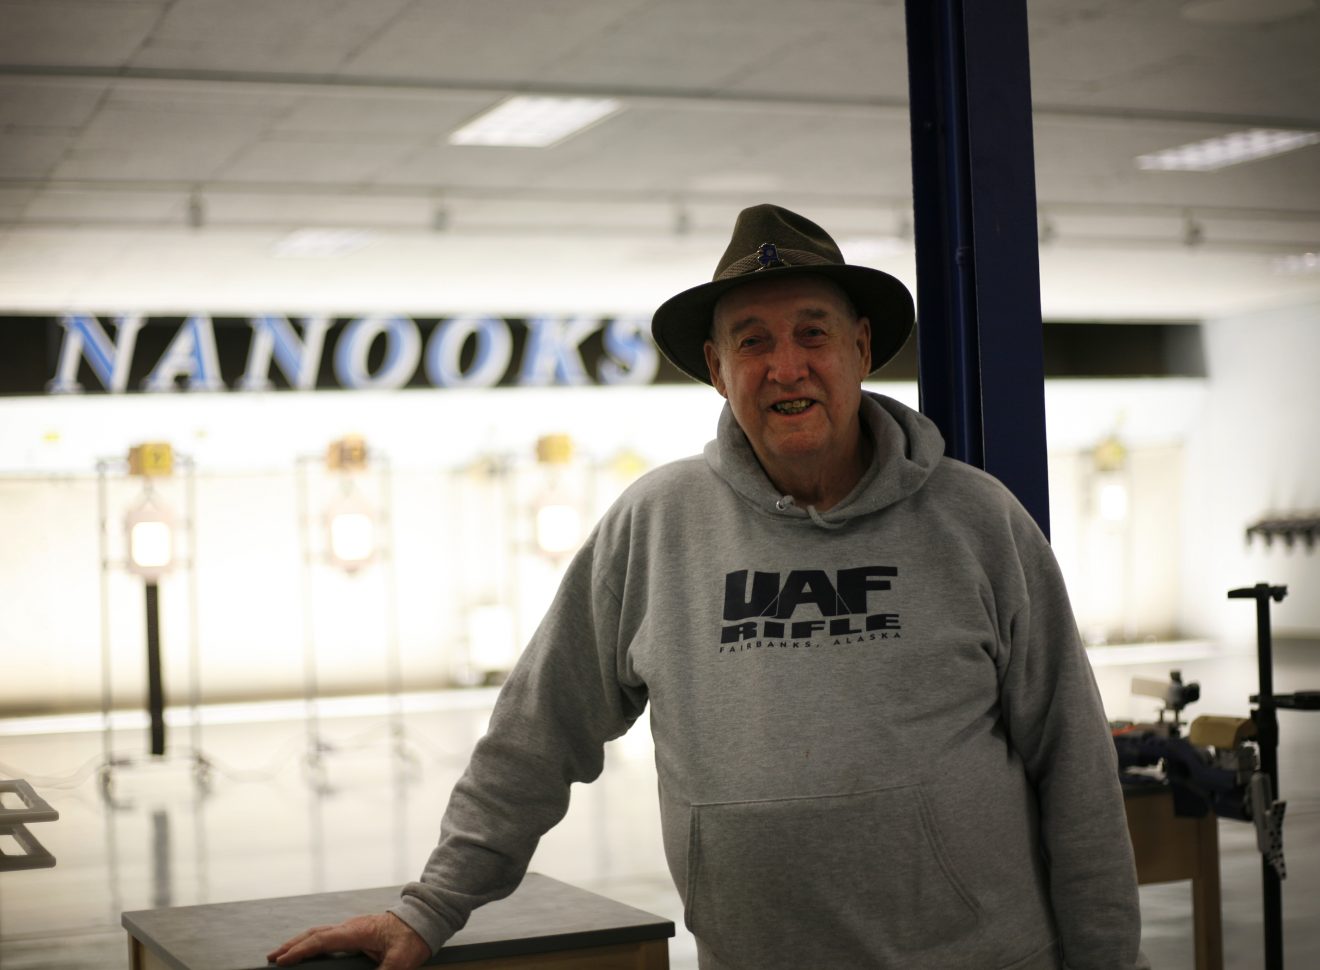 Joe Nava stands in front of the firing lanes at the E.F. Horton Shooting Arena at the University of Alaska Fairbanks. Elizabeth Talbot photo